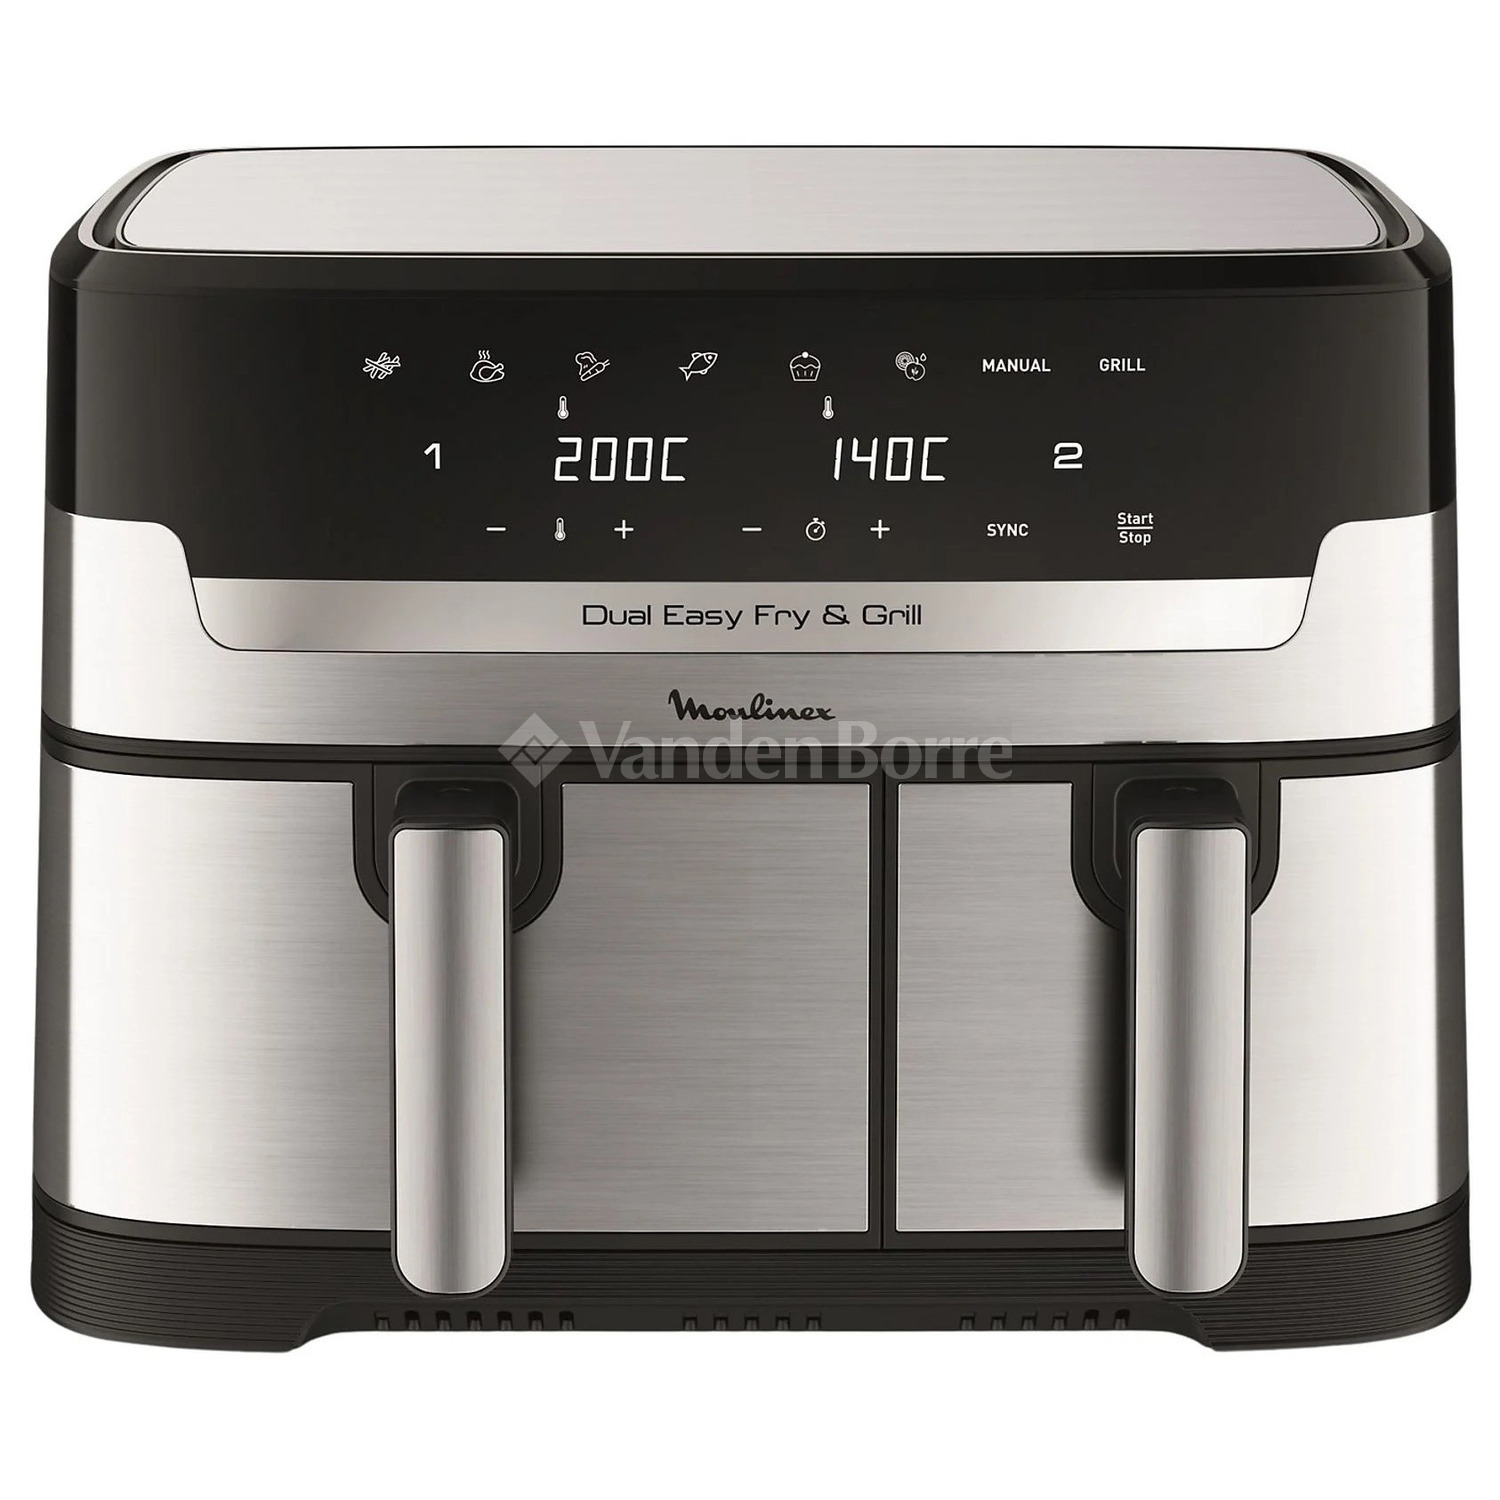 AIRFRYER MOULINEX DUAL EASY FRY & GRILL 8.3L STAINLESS STEEL EZ905D20